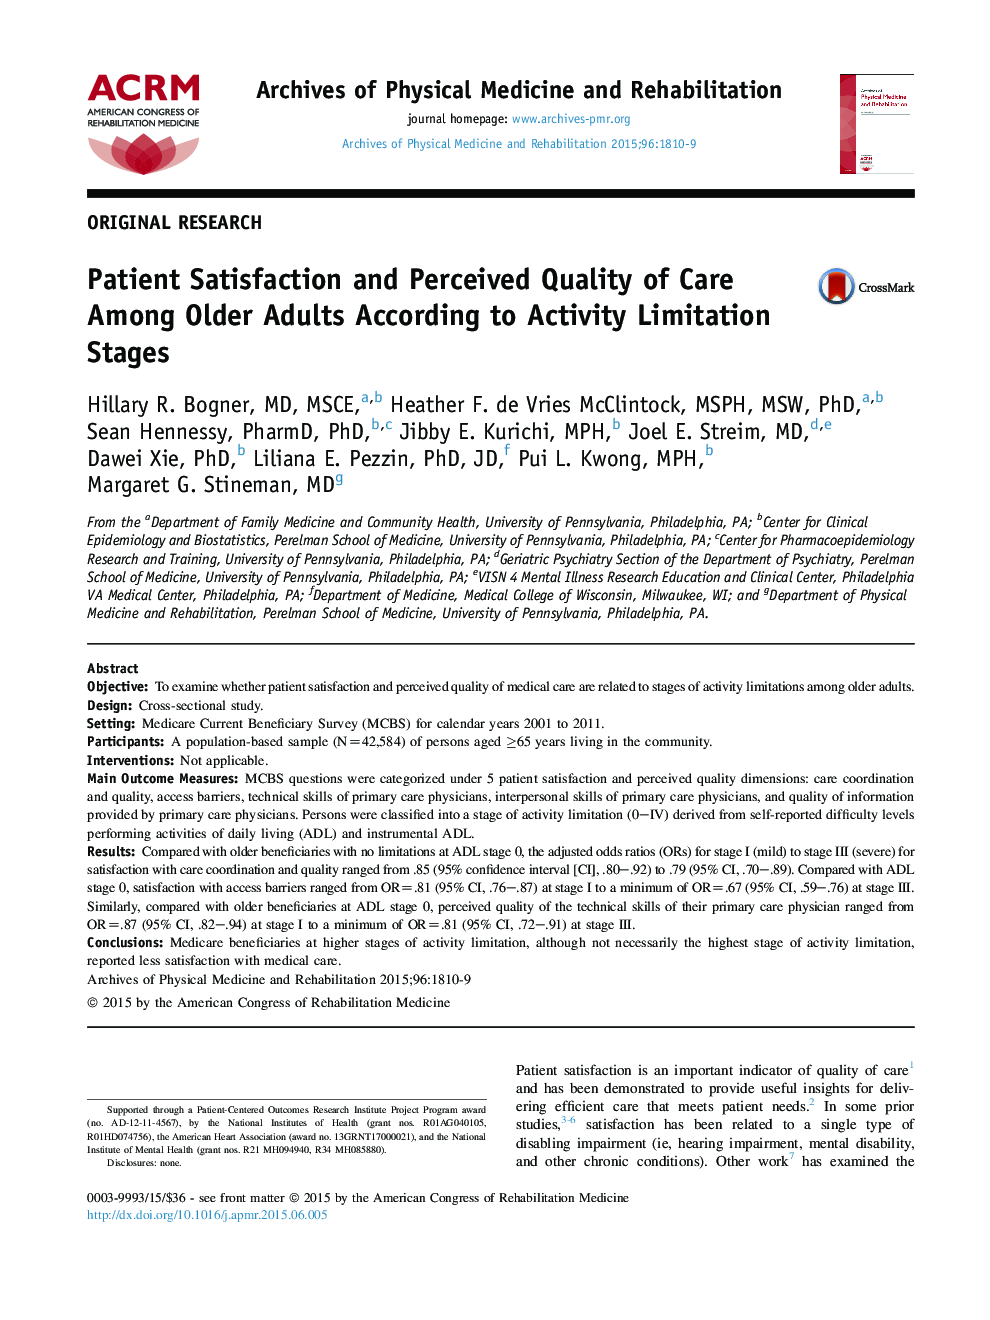 Patient Satisfaction and Perceived Quality of Care Among Older Adults According to Activity Limitation Stages 